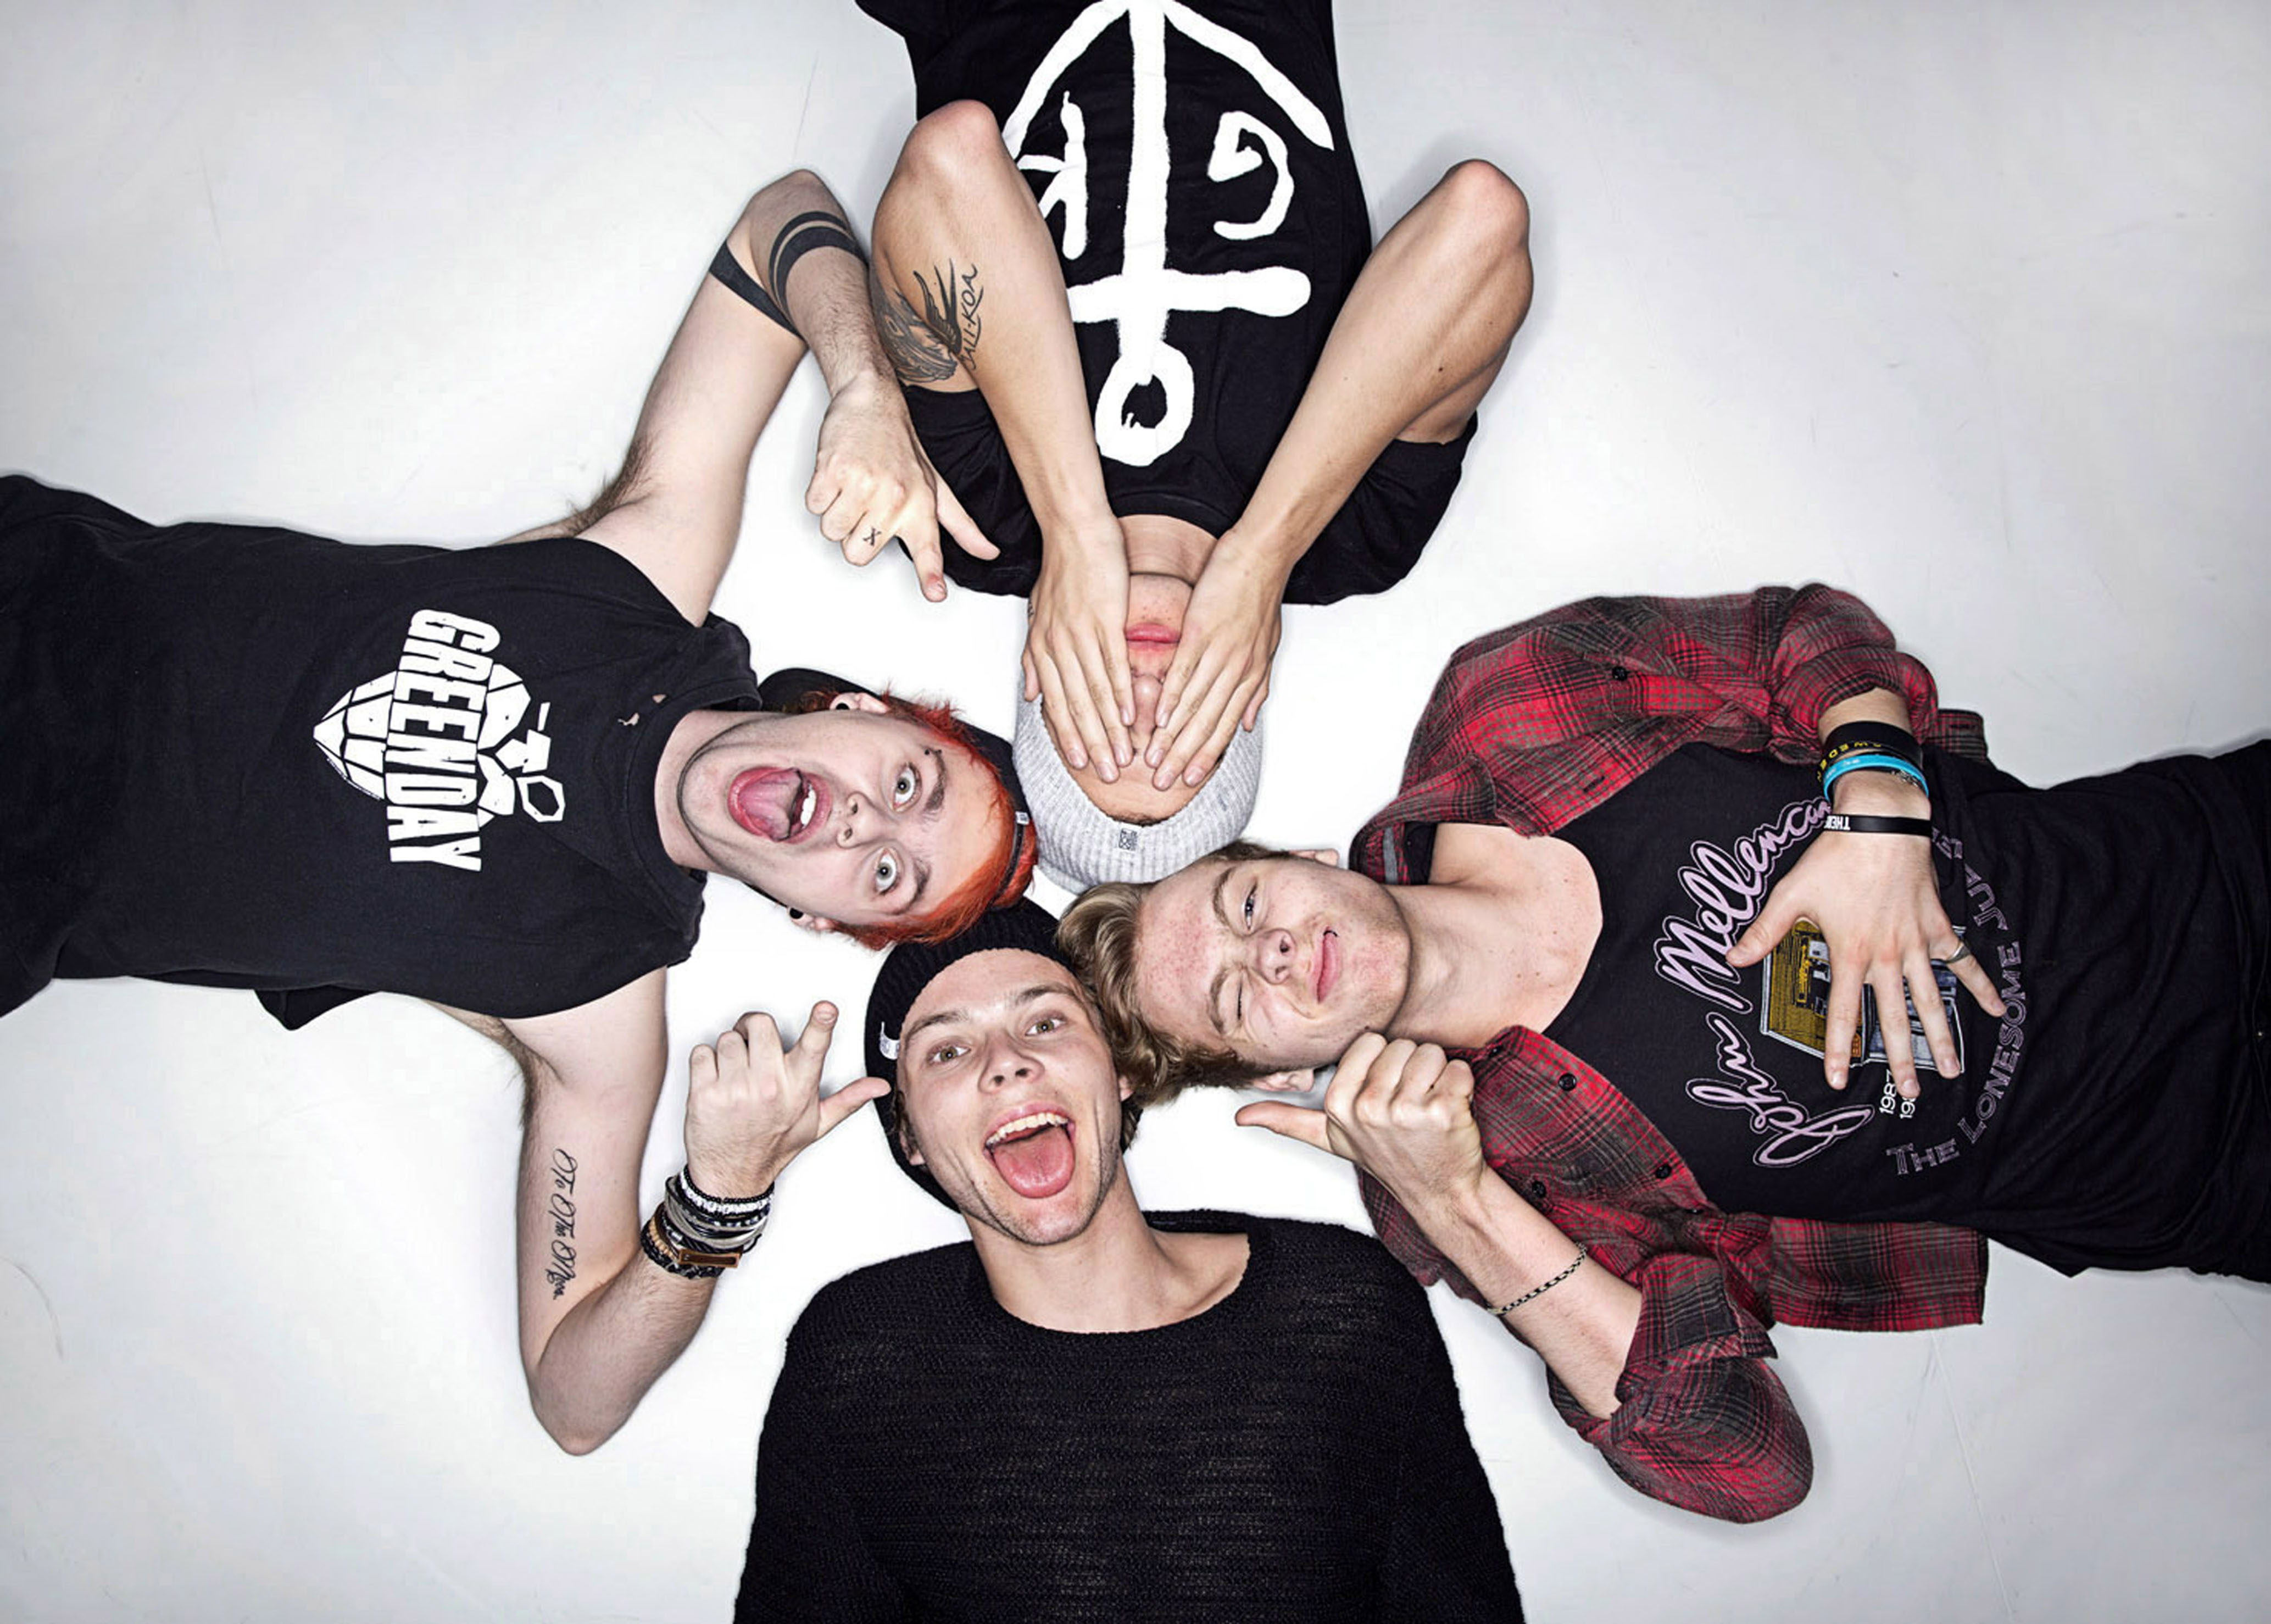 5 seconds of summer, images, image, wallpaper, photos, photo, photograph, g...